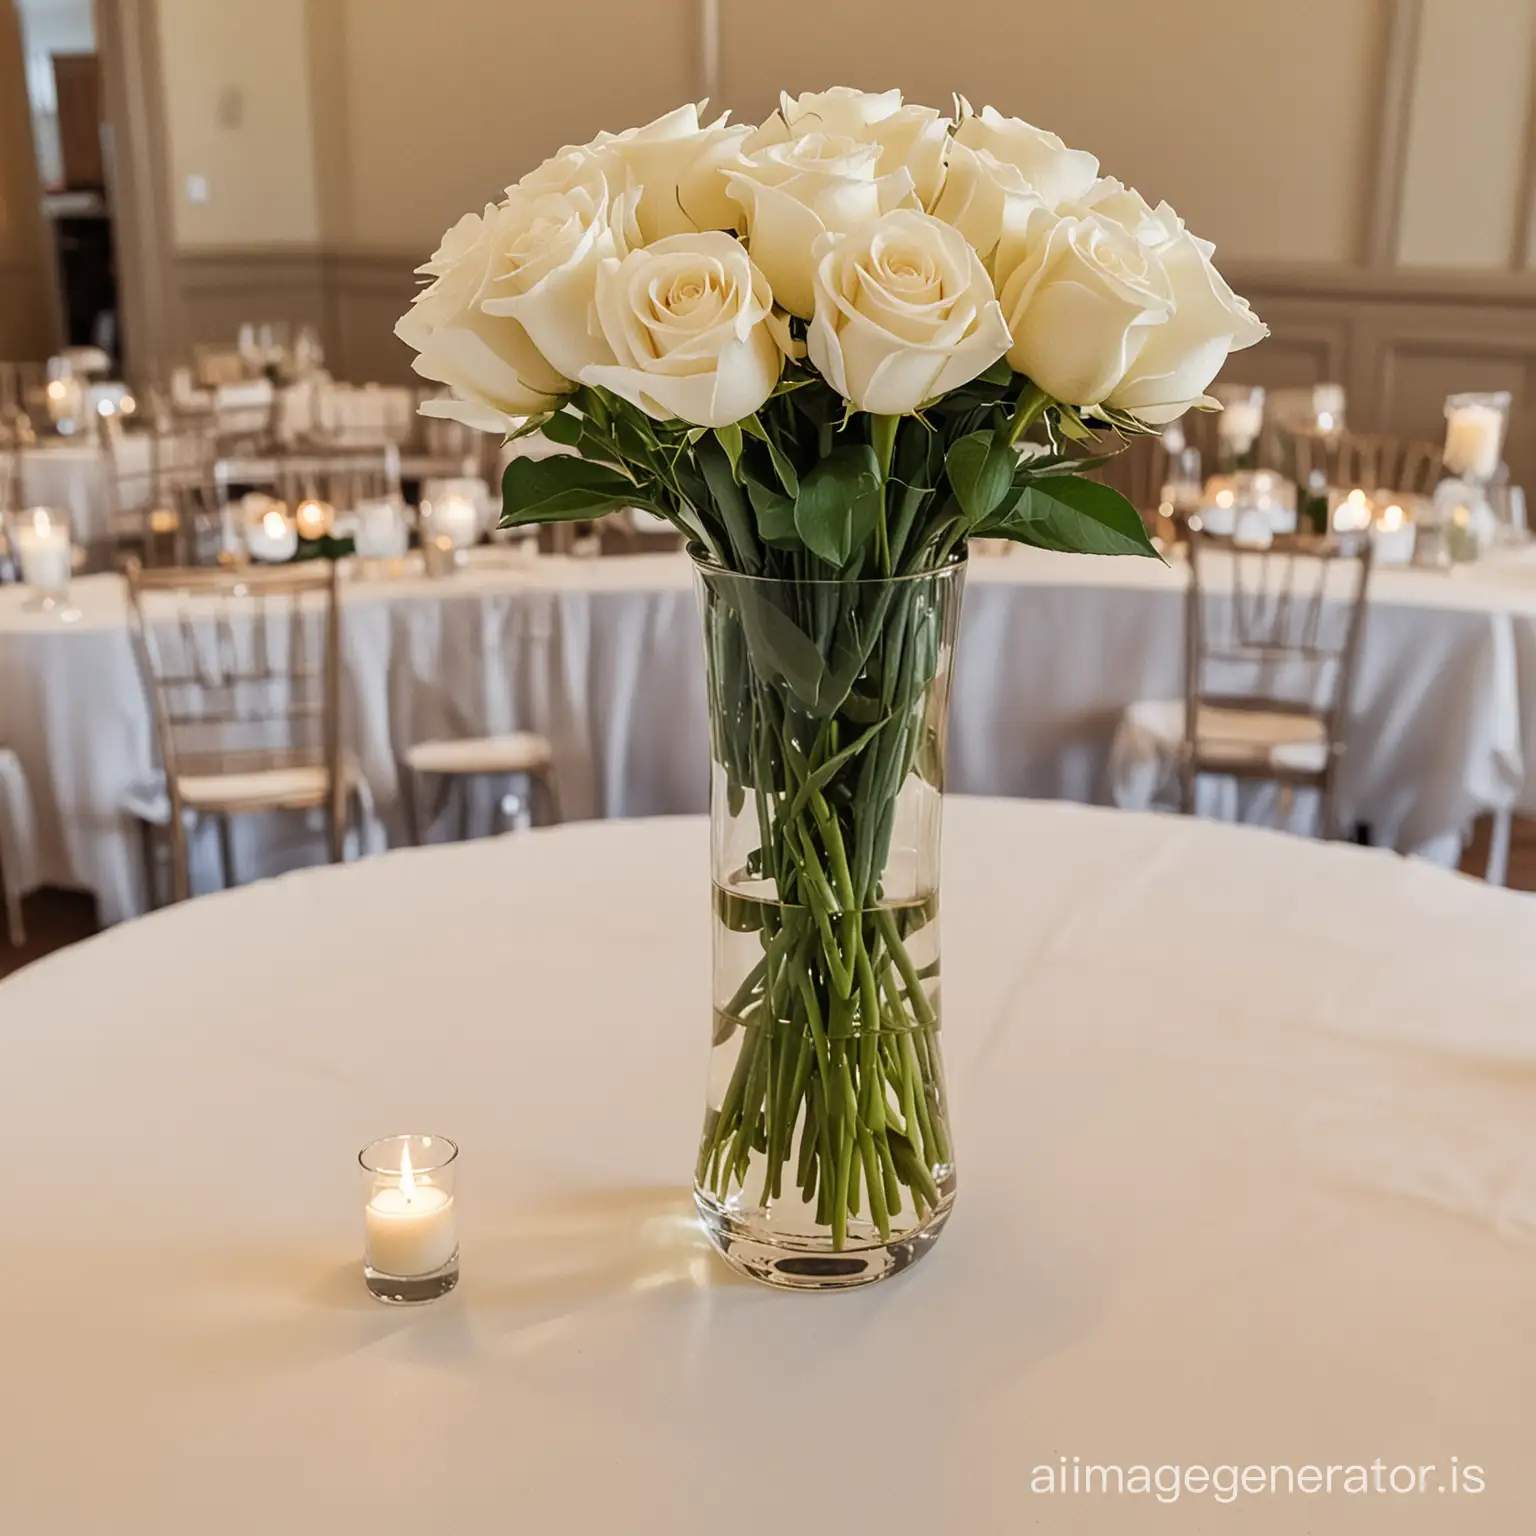 a wedding reception with a dozen white roses in a simple glass vase on one table and all other tables have a single white rose in a bud vase